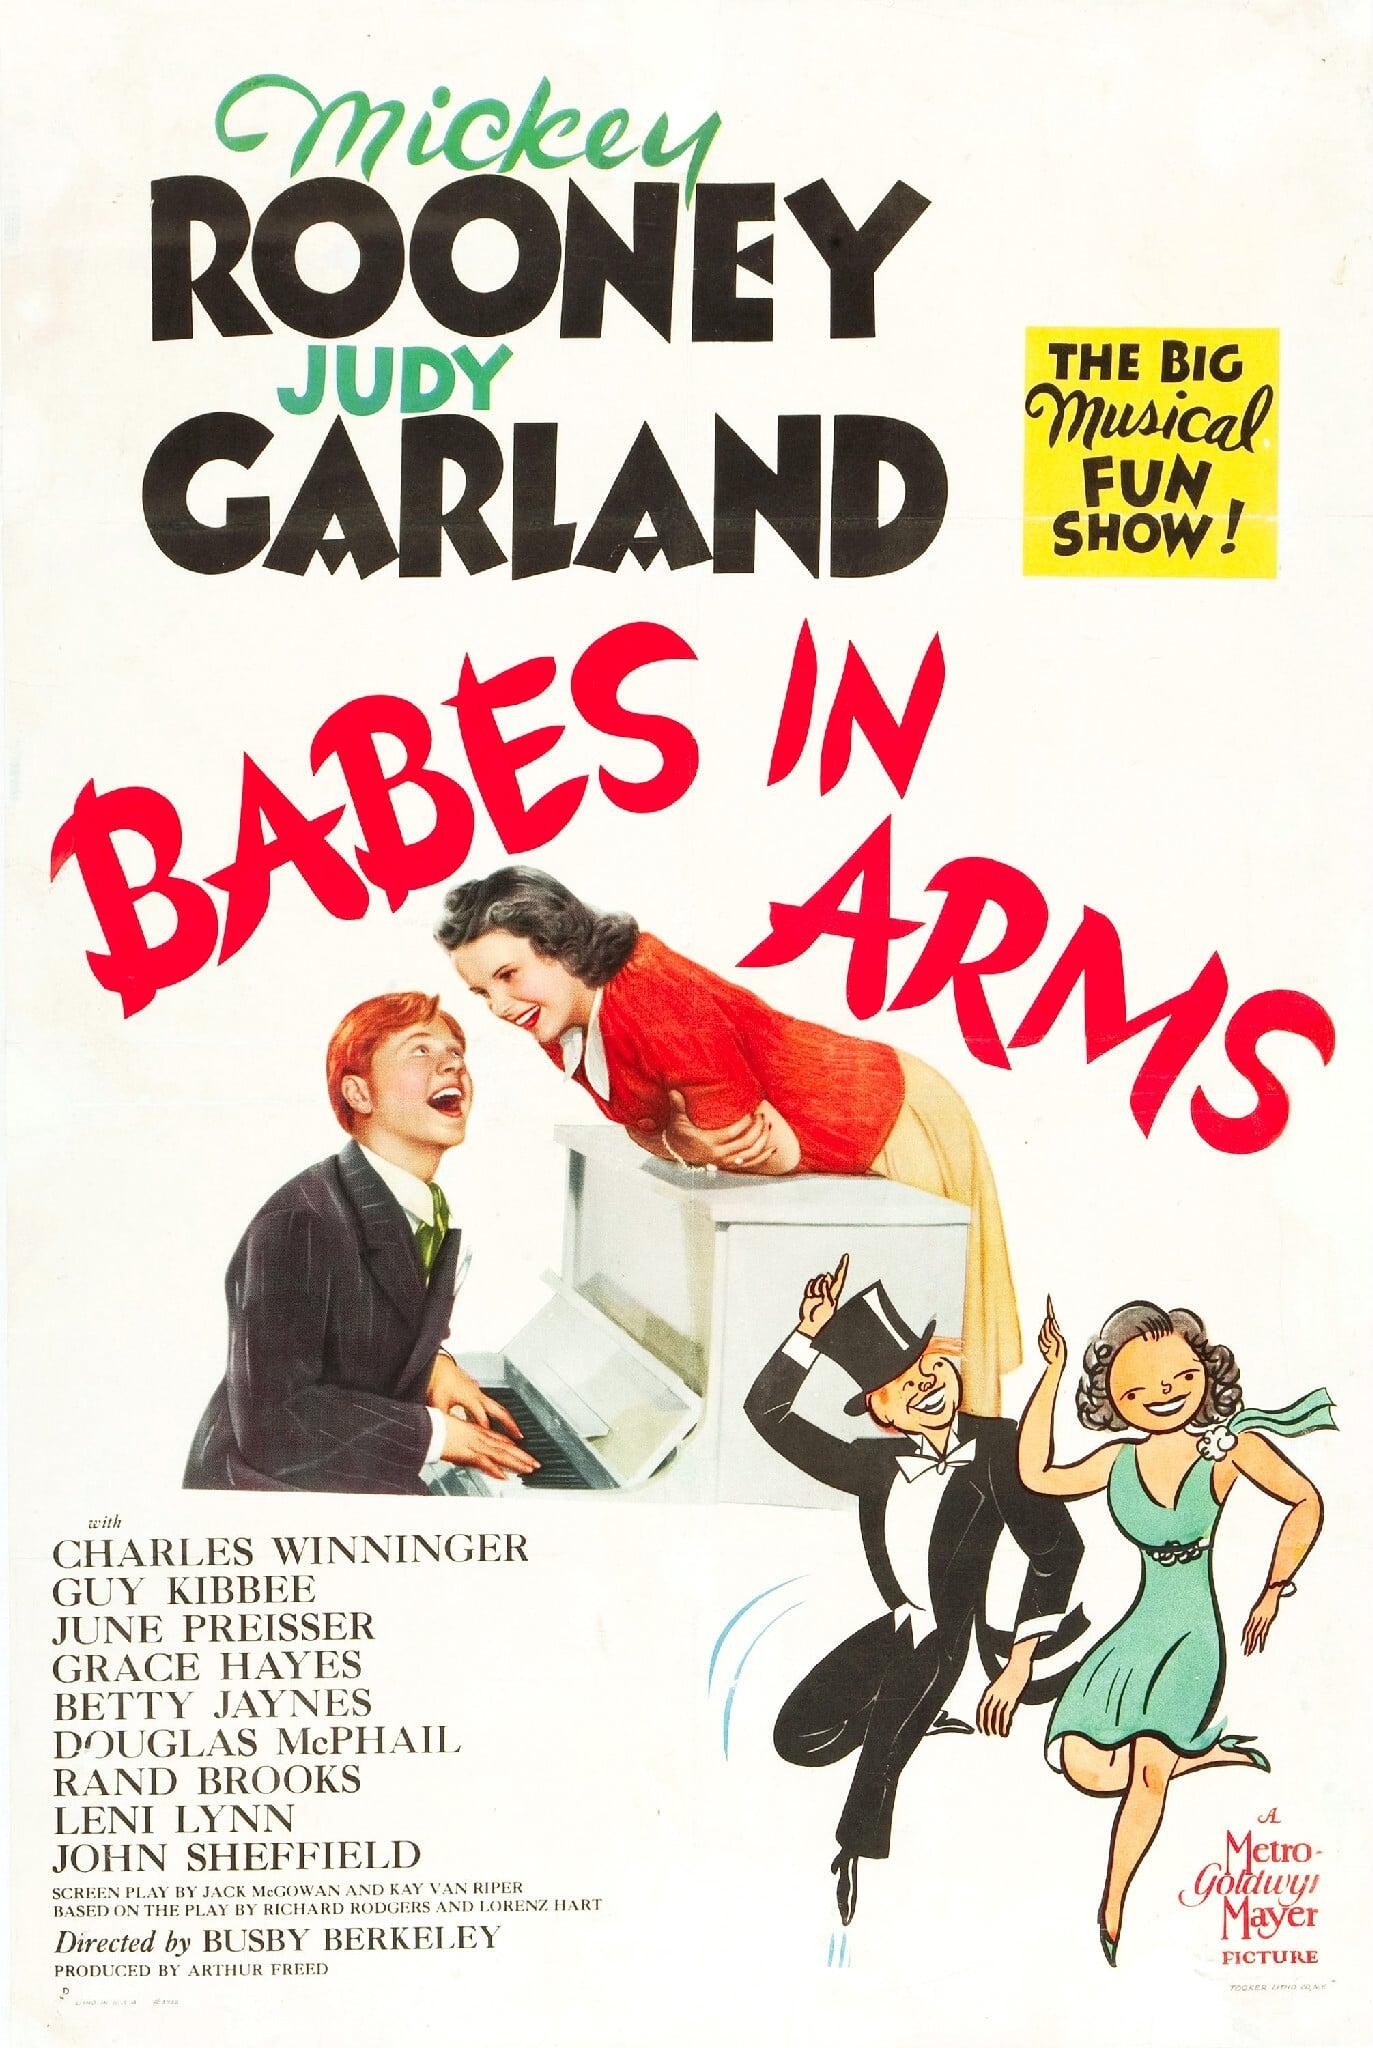 Babes in Arms poster